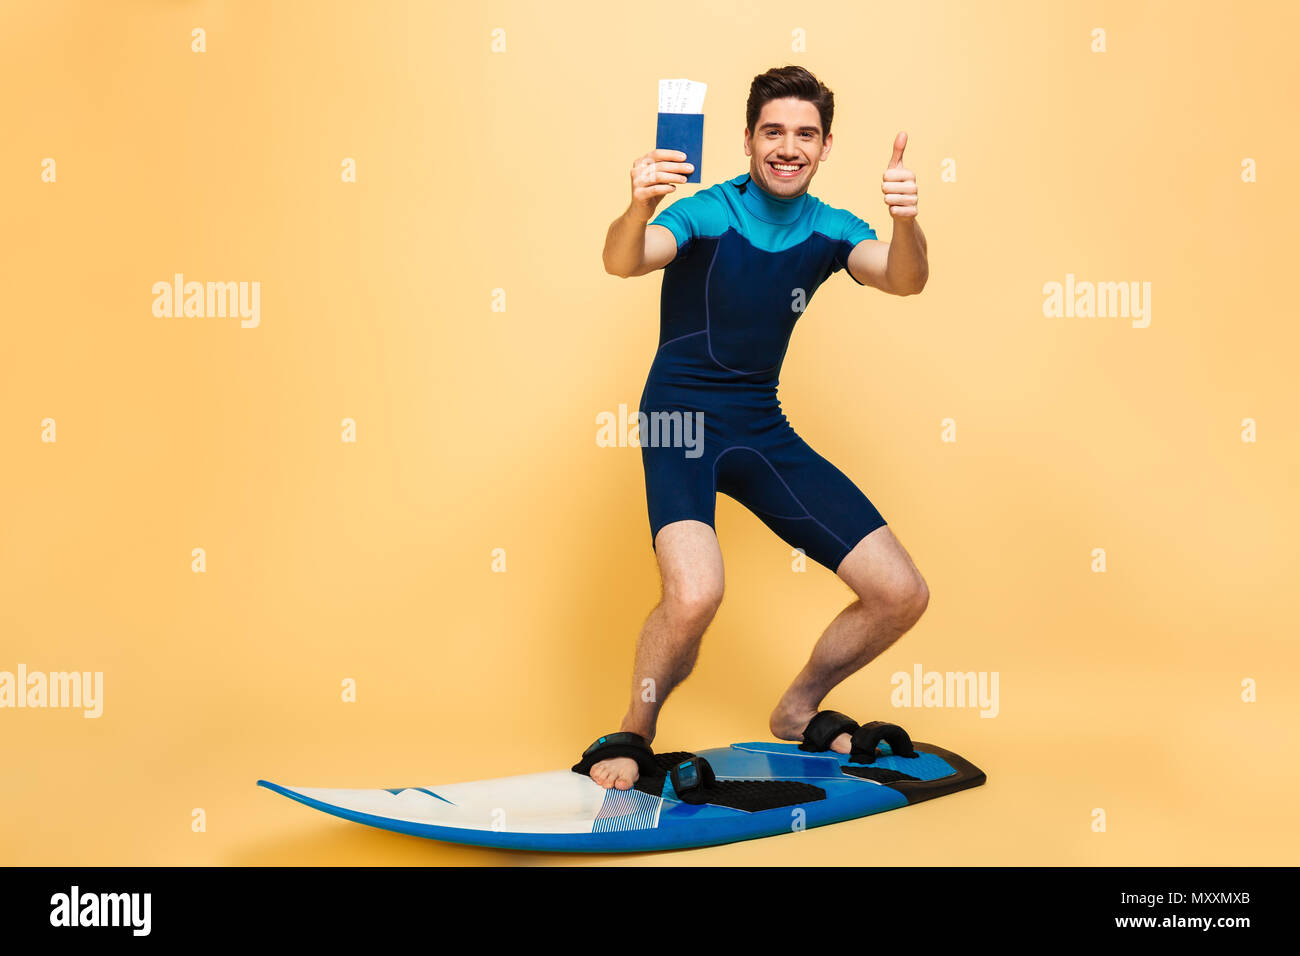 Full length portrait of a happy young man dressed in swimsuit showing passport while surfing on a board under money shower isolated over yellow backgr Stock Photo